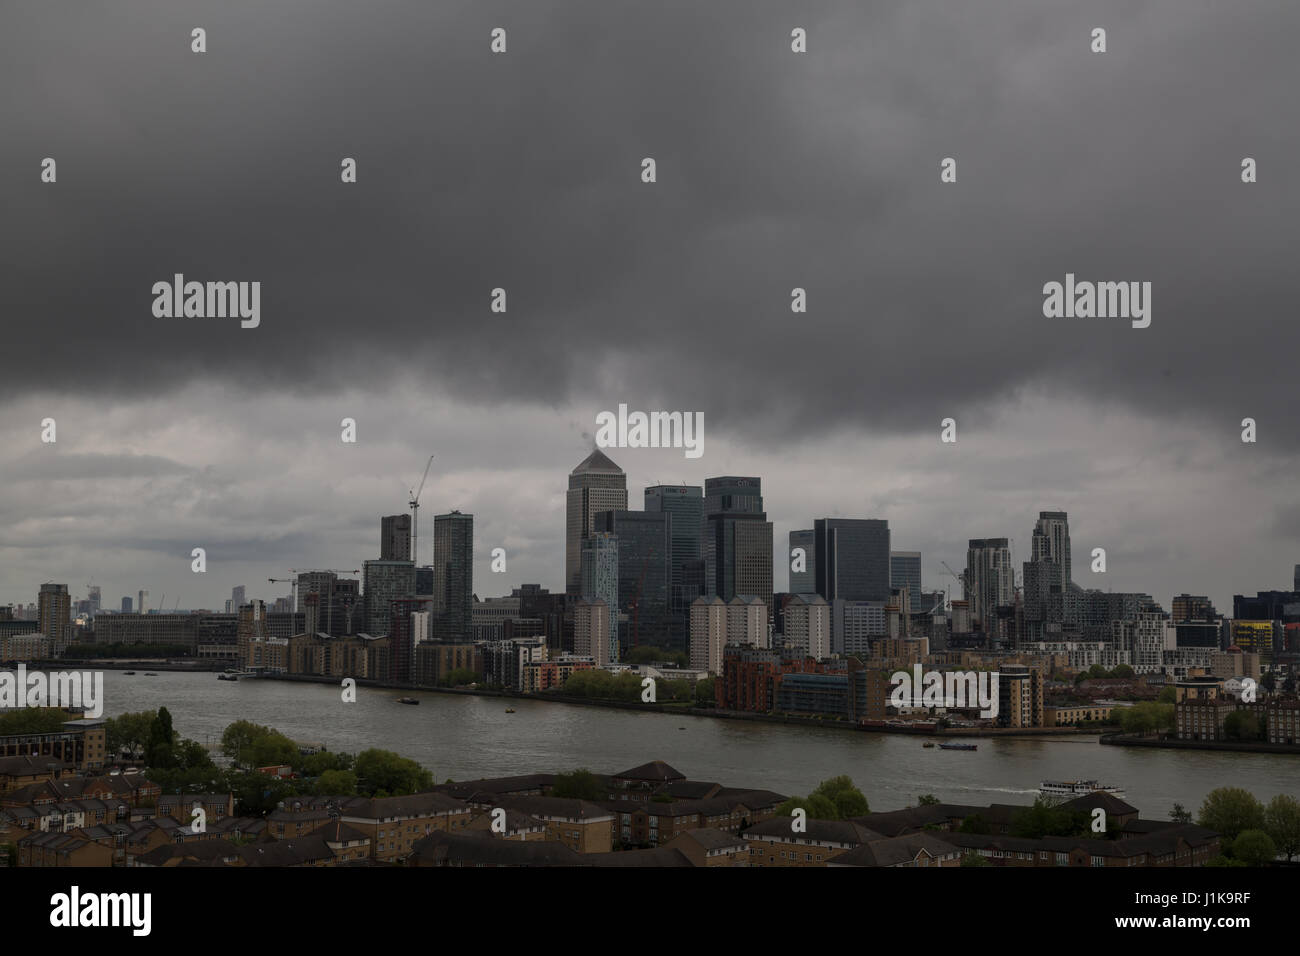 London, UK. 22nd April, 2017. UK Weather: Grey skies and cloud over London and Canary Wharf business park buildings © Guy Corbishley/Alamy Live News Stock Photo